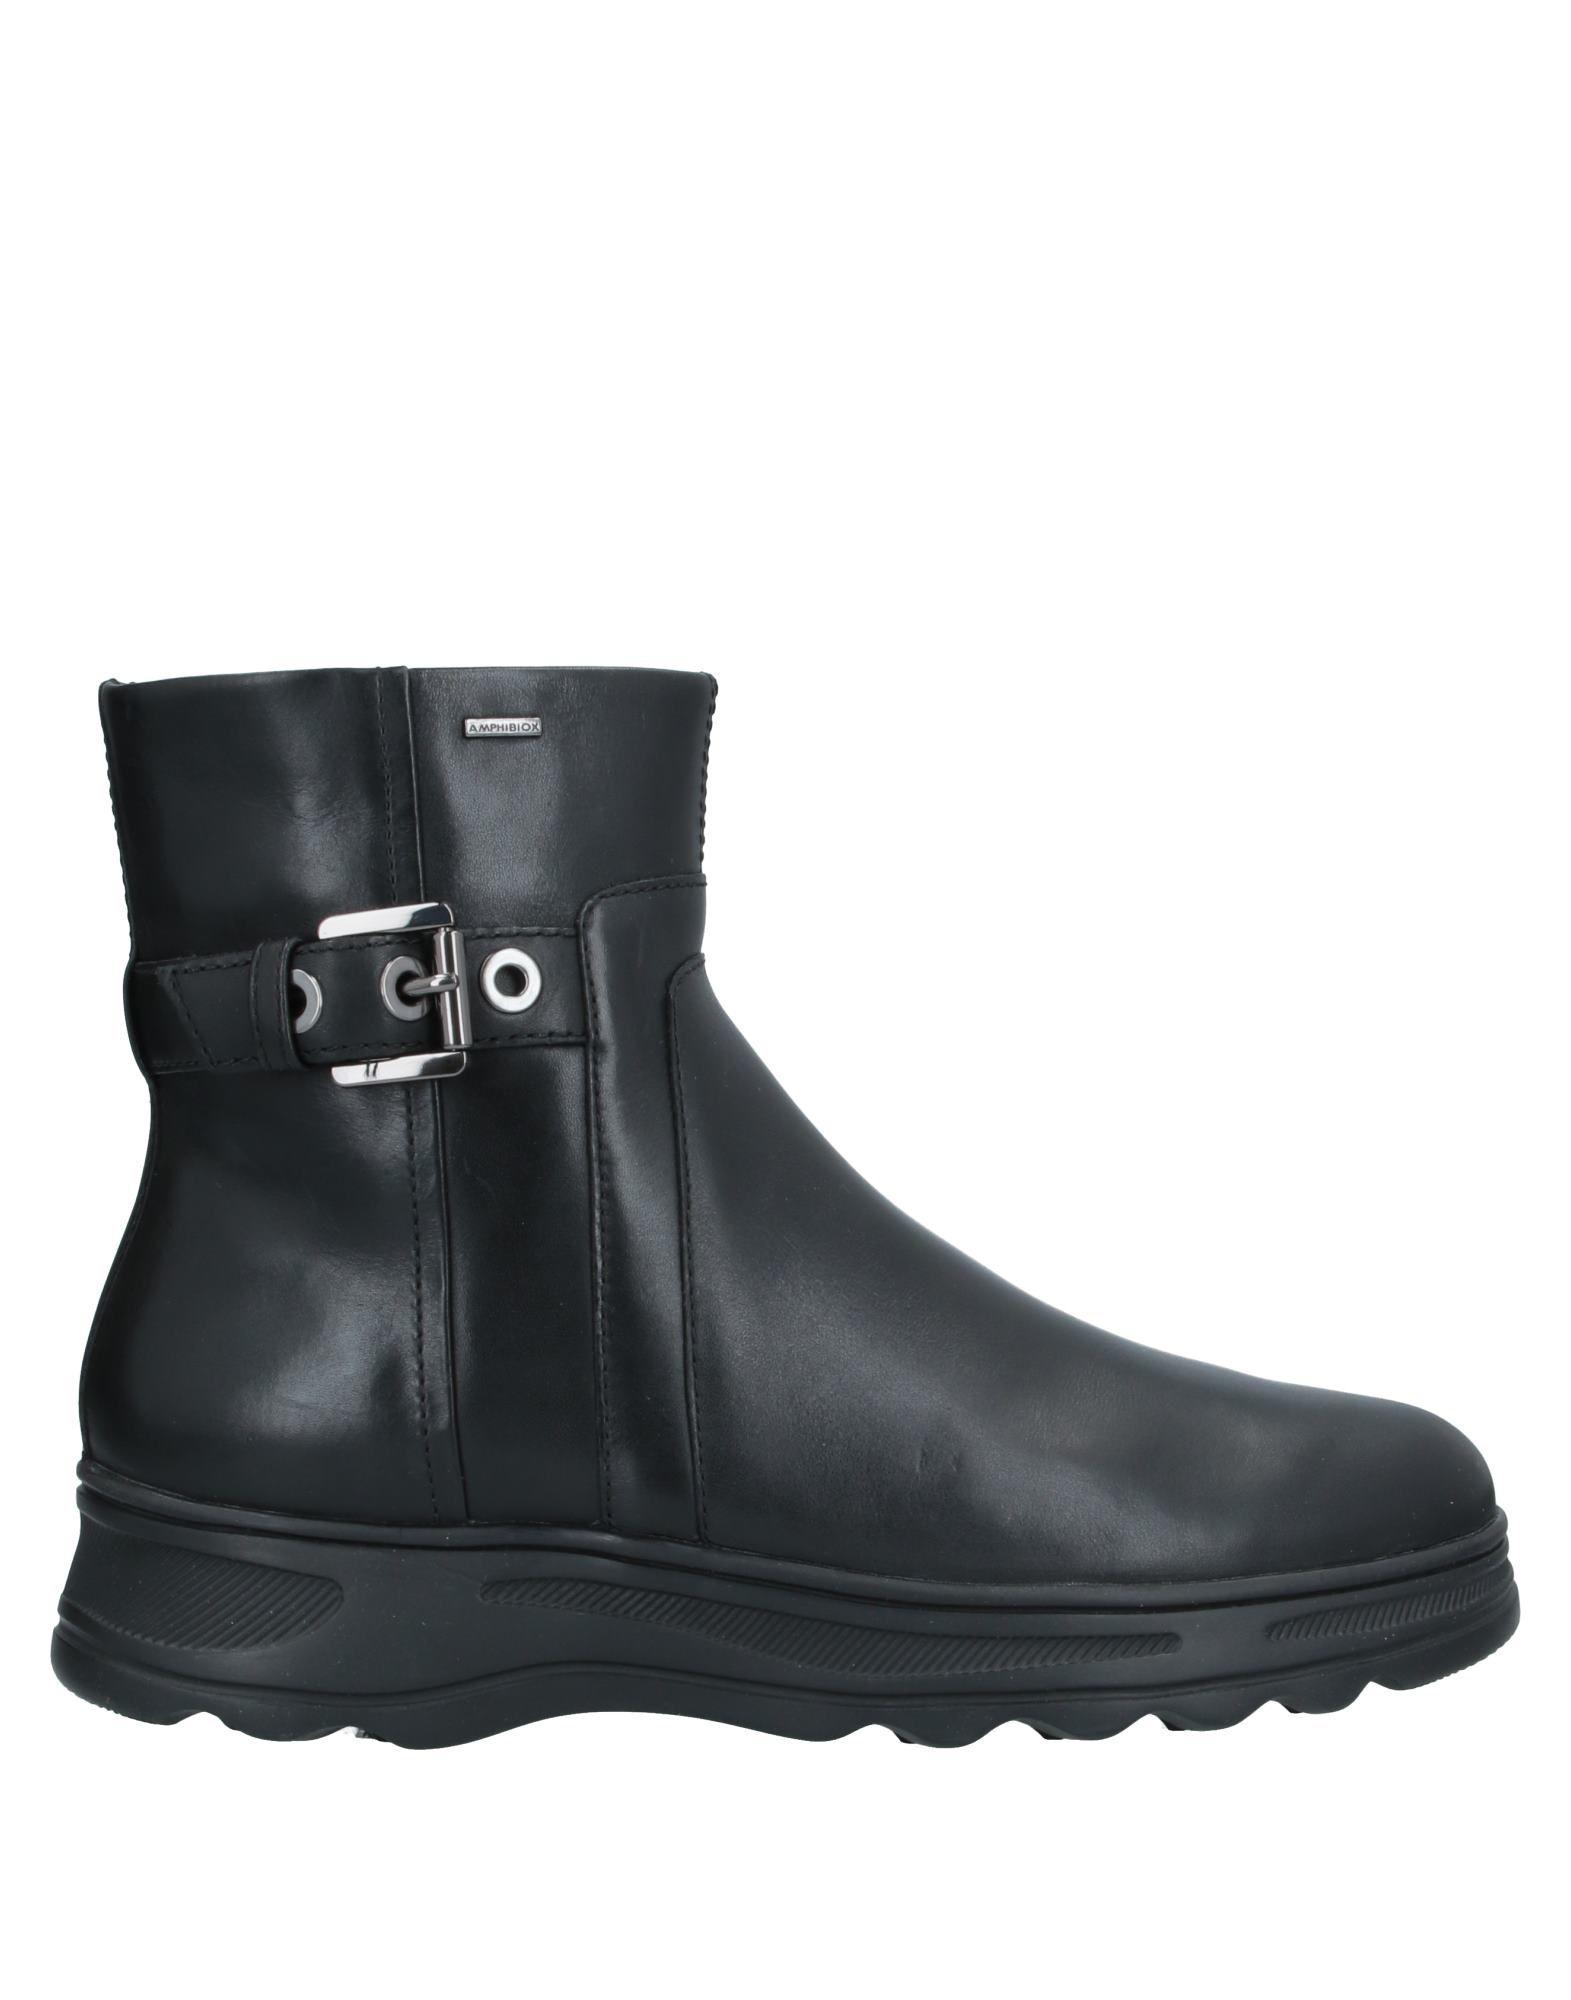 Geox Rubber Ankle Boots in Black - Lyst